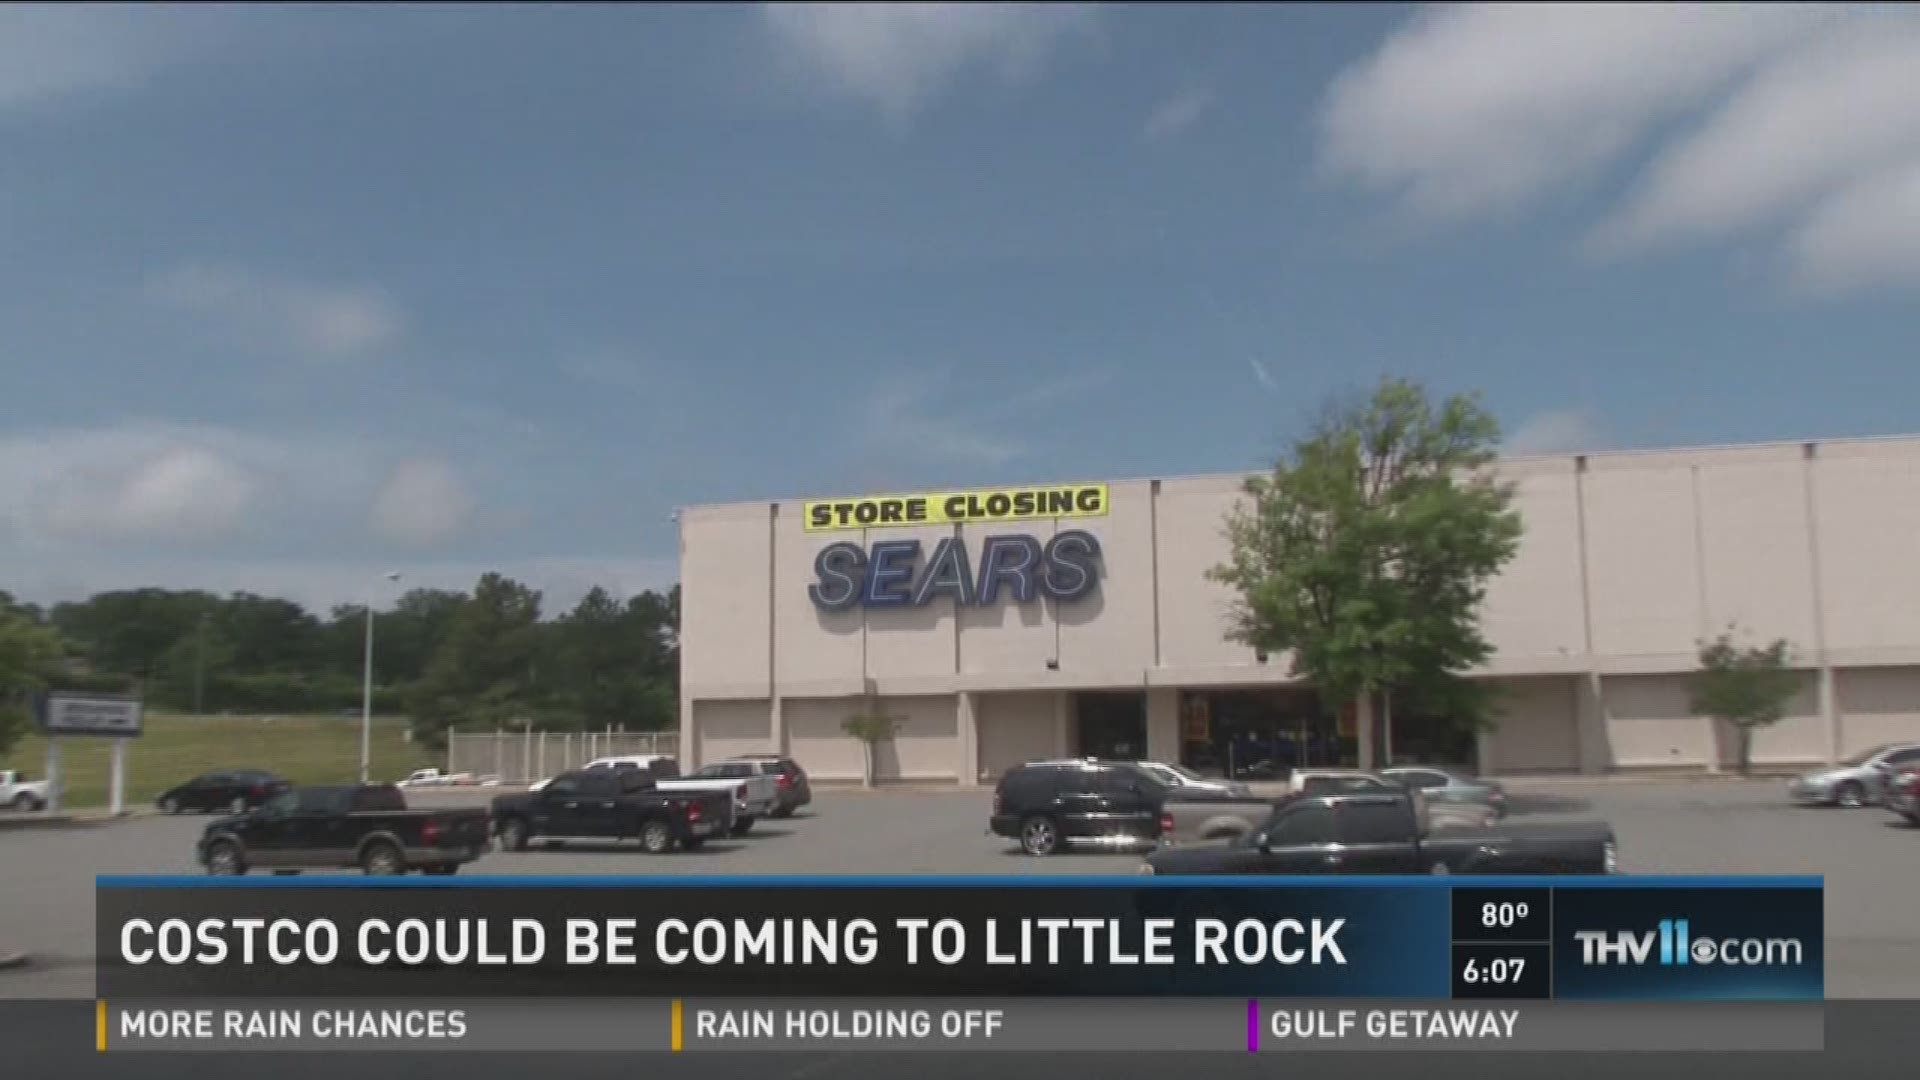 With Sears shutting down, rumors are flying about a possible Costco coming to Little Rock